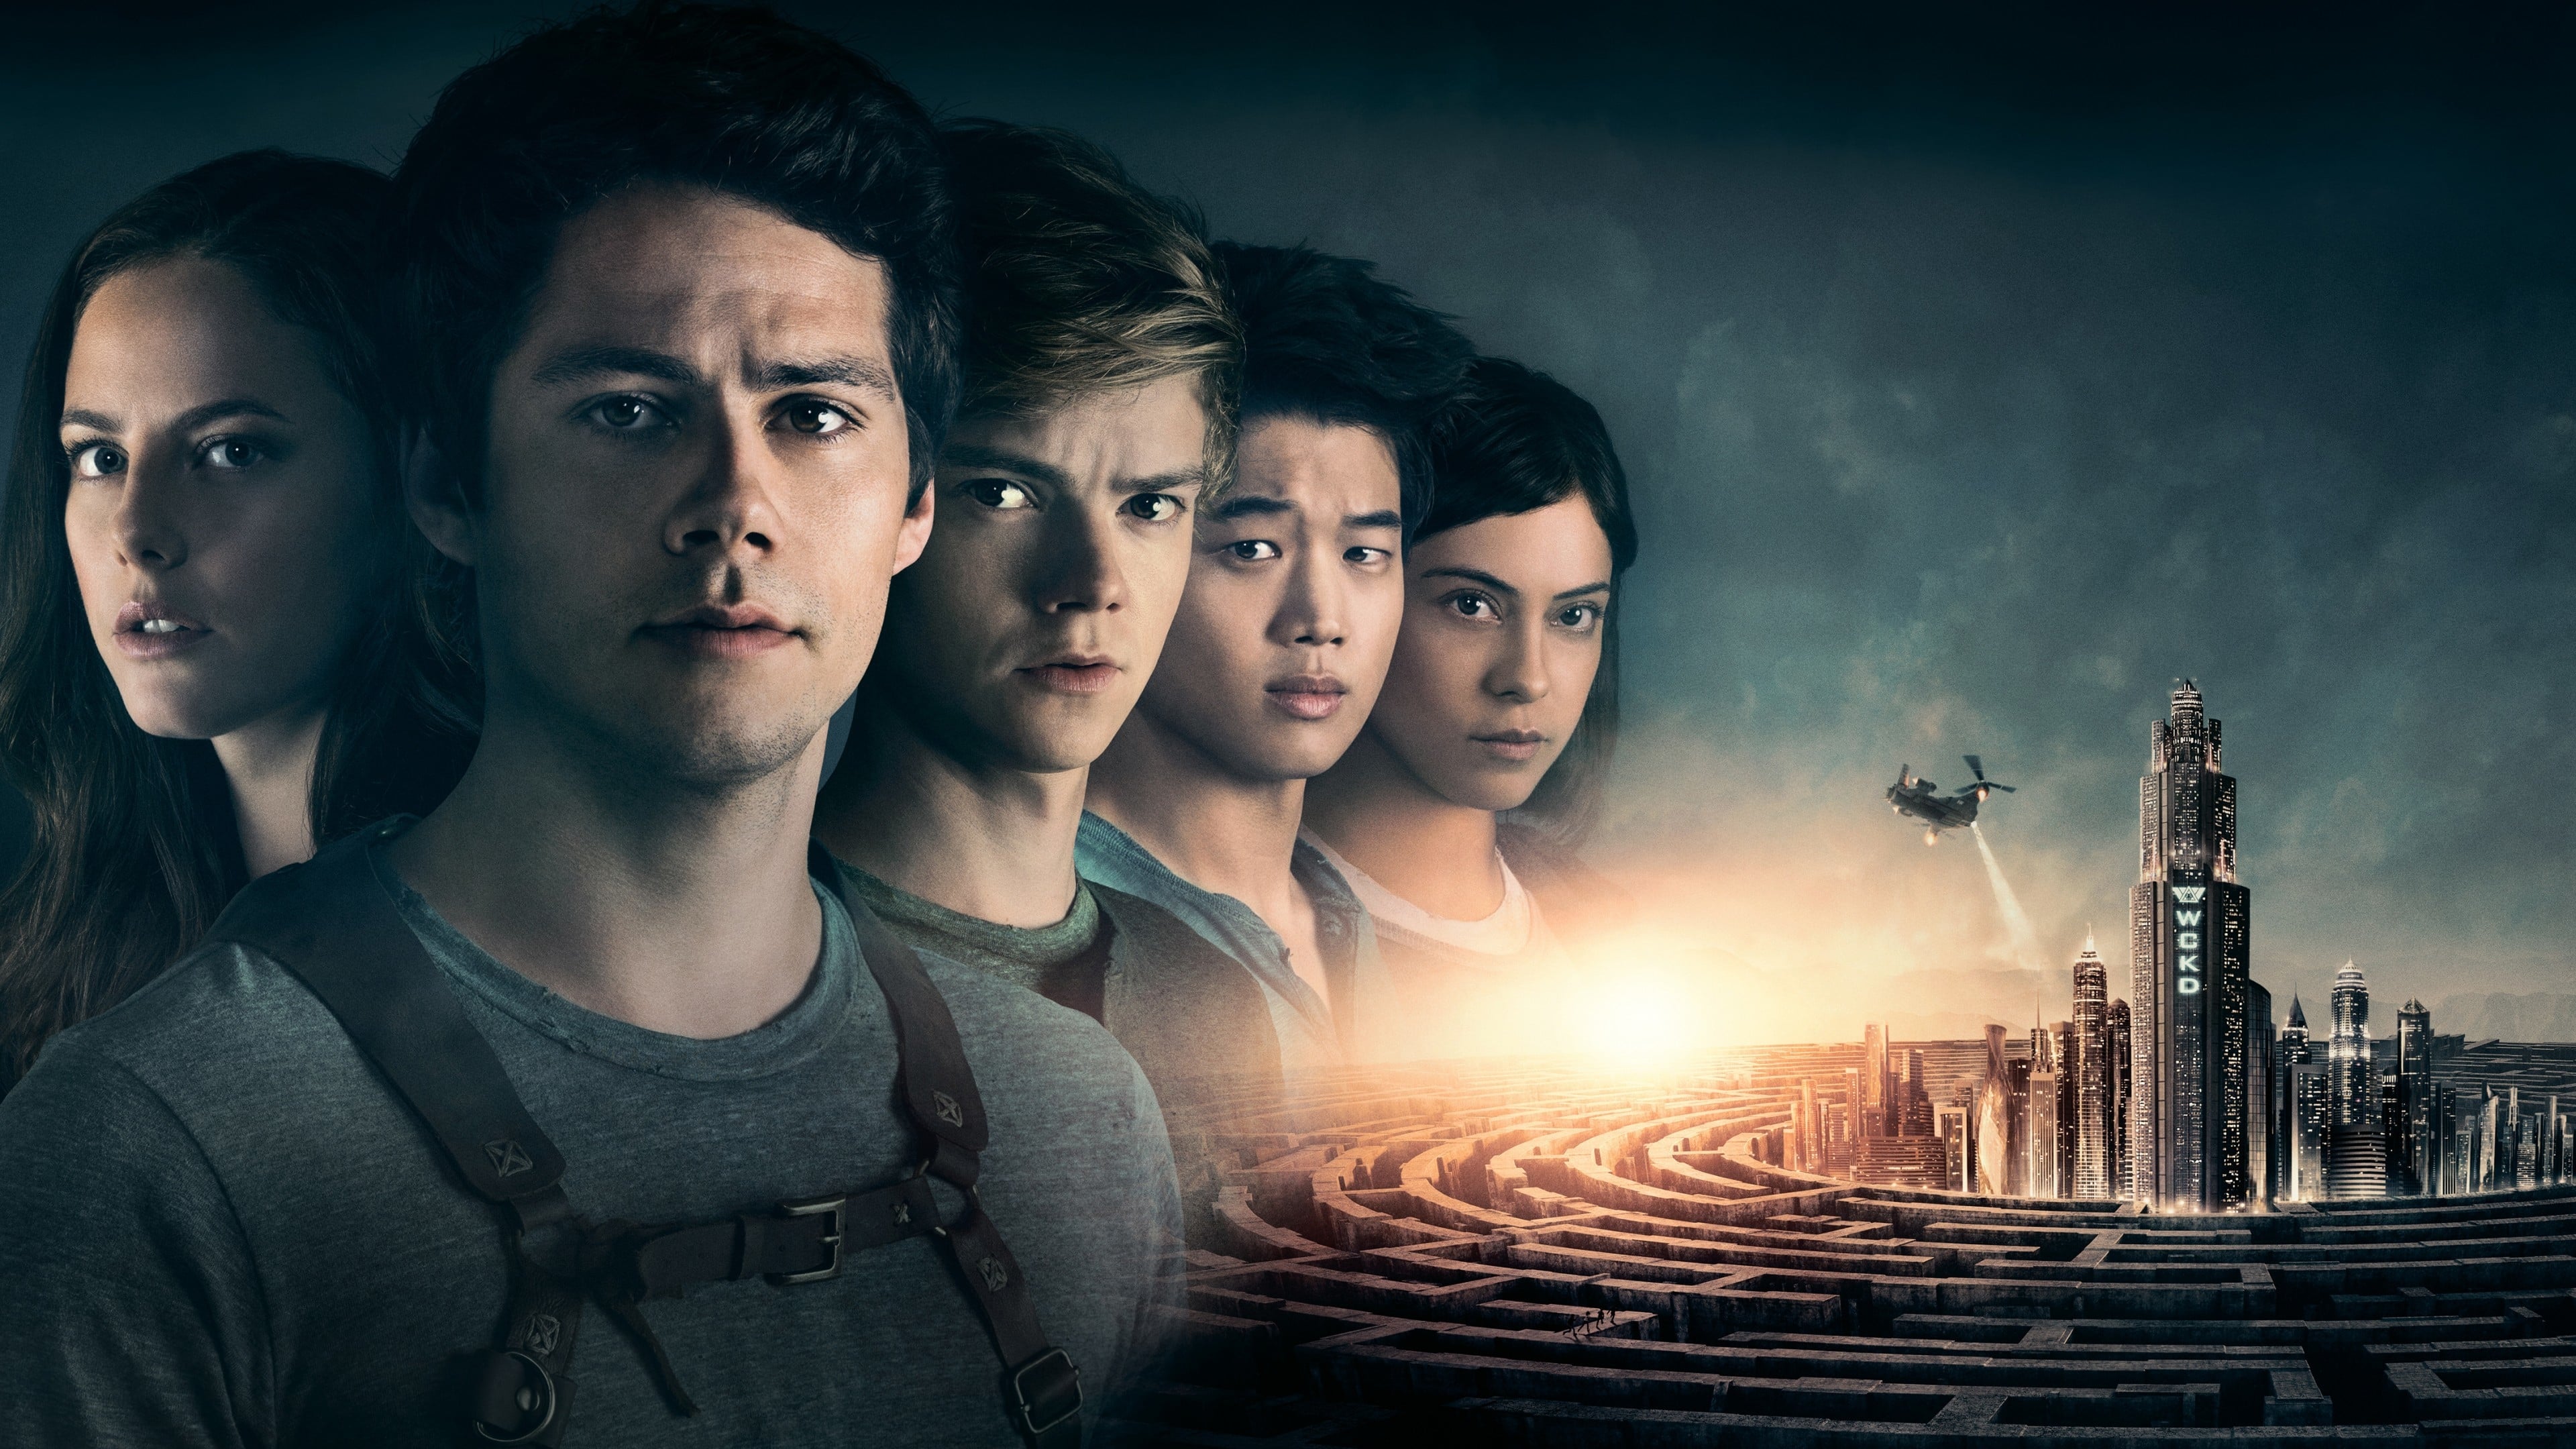 Maze Runner: The Death Cure in Hindi Dubbed